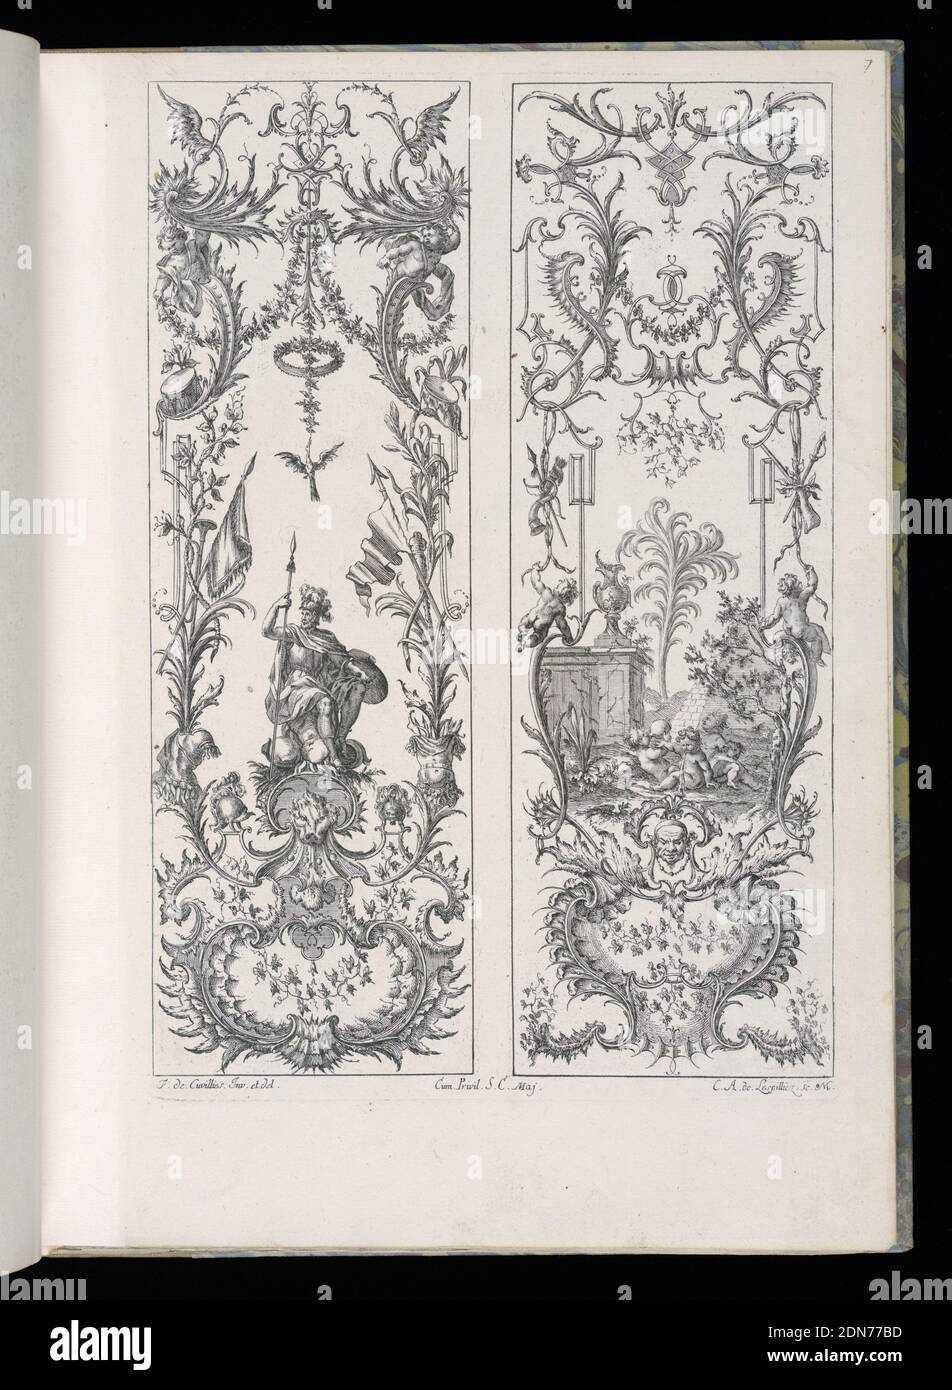 Two Upright Panels, Livre Nouveaux de Paneaux à divers usages (Book of New Panels for Various Uses), François de Cuvilliés the Elder, Belgian, active Germany, 1695 - 1768, Carl Albert von Lespilliez, German, 1723 - 1796, François de Cuvilliés the Elder, Belgian, active Germany, 1695 - 1768, Engraving on paper, Folio 8, plate 7 of series 6. Two designs for upright panels in Rococo style. At left, panel decorated with masks, armorial trophies, banners, drums, and putti figures. A central male armored figure sits upon a rock and holds a spear and shield. At right, panel decorated with masks Stock Photo